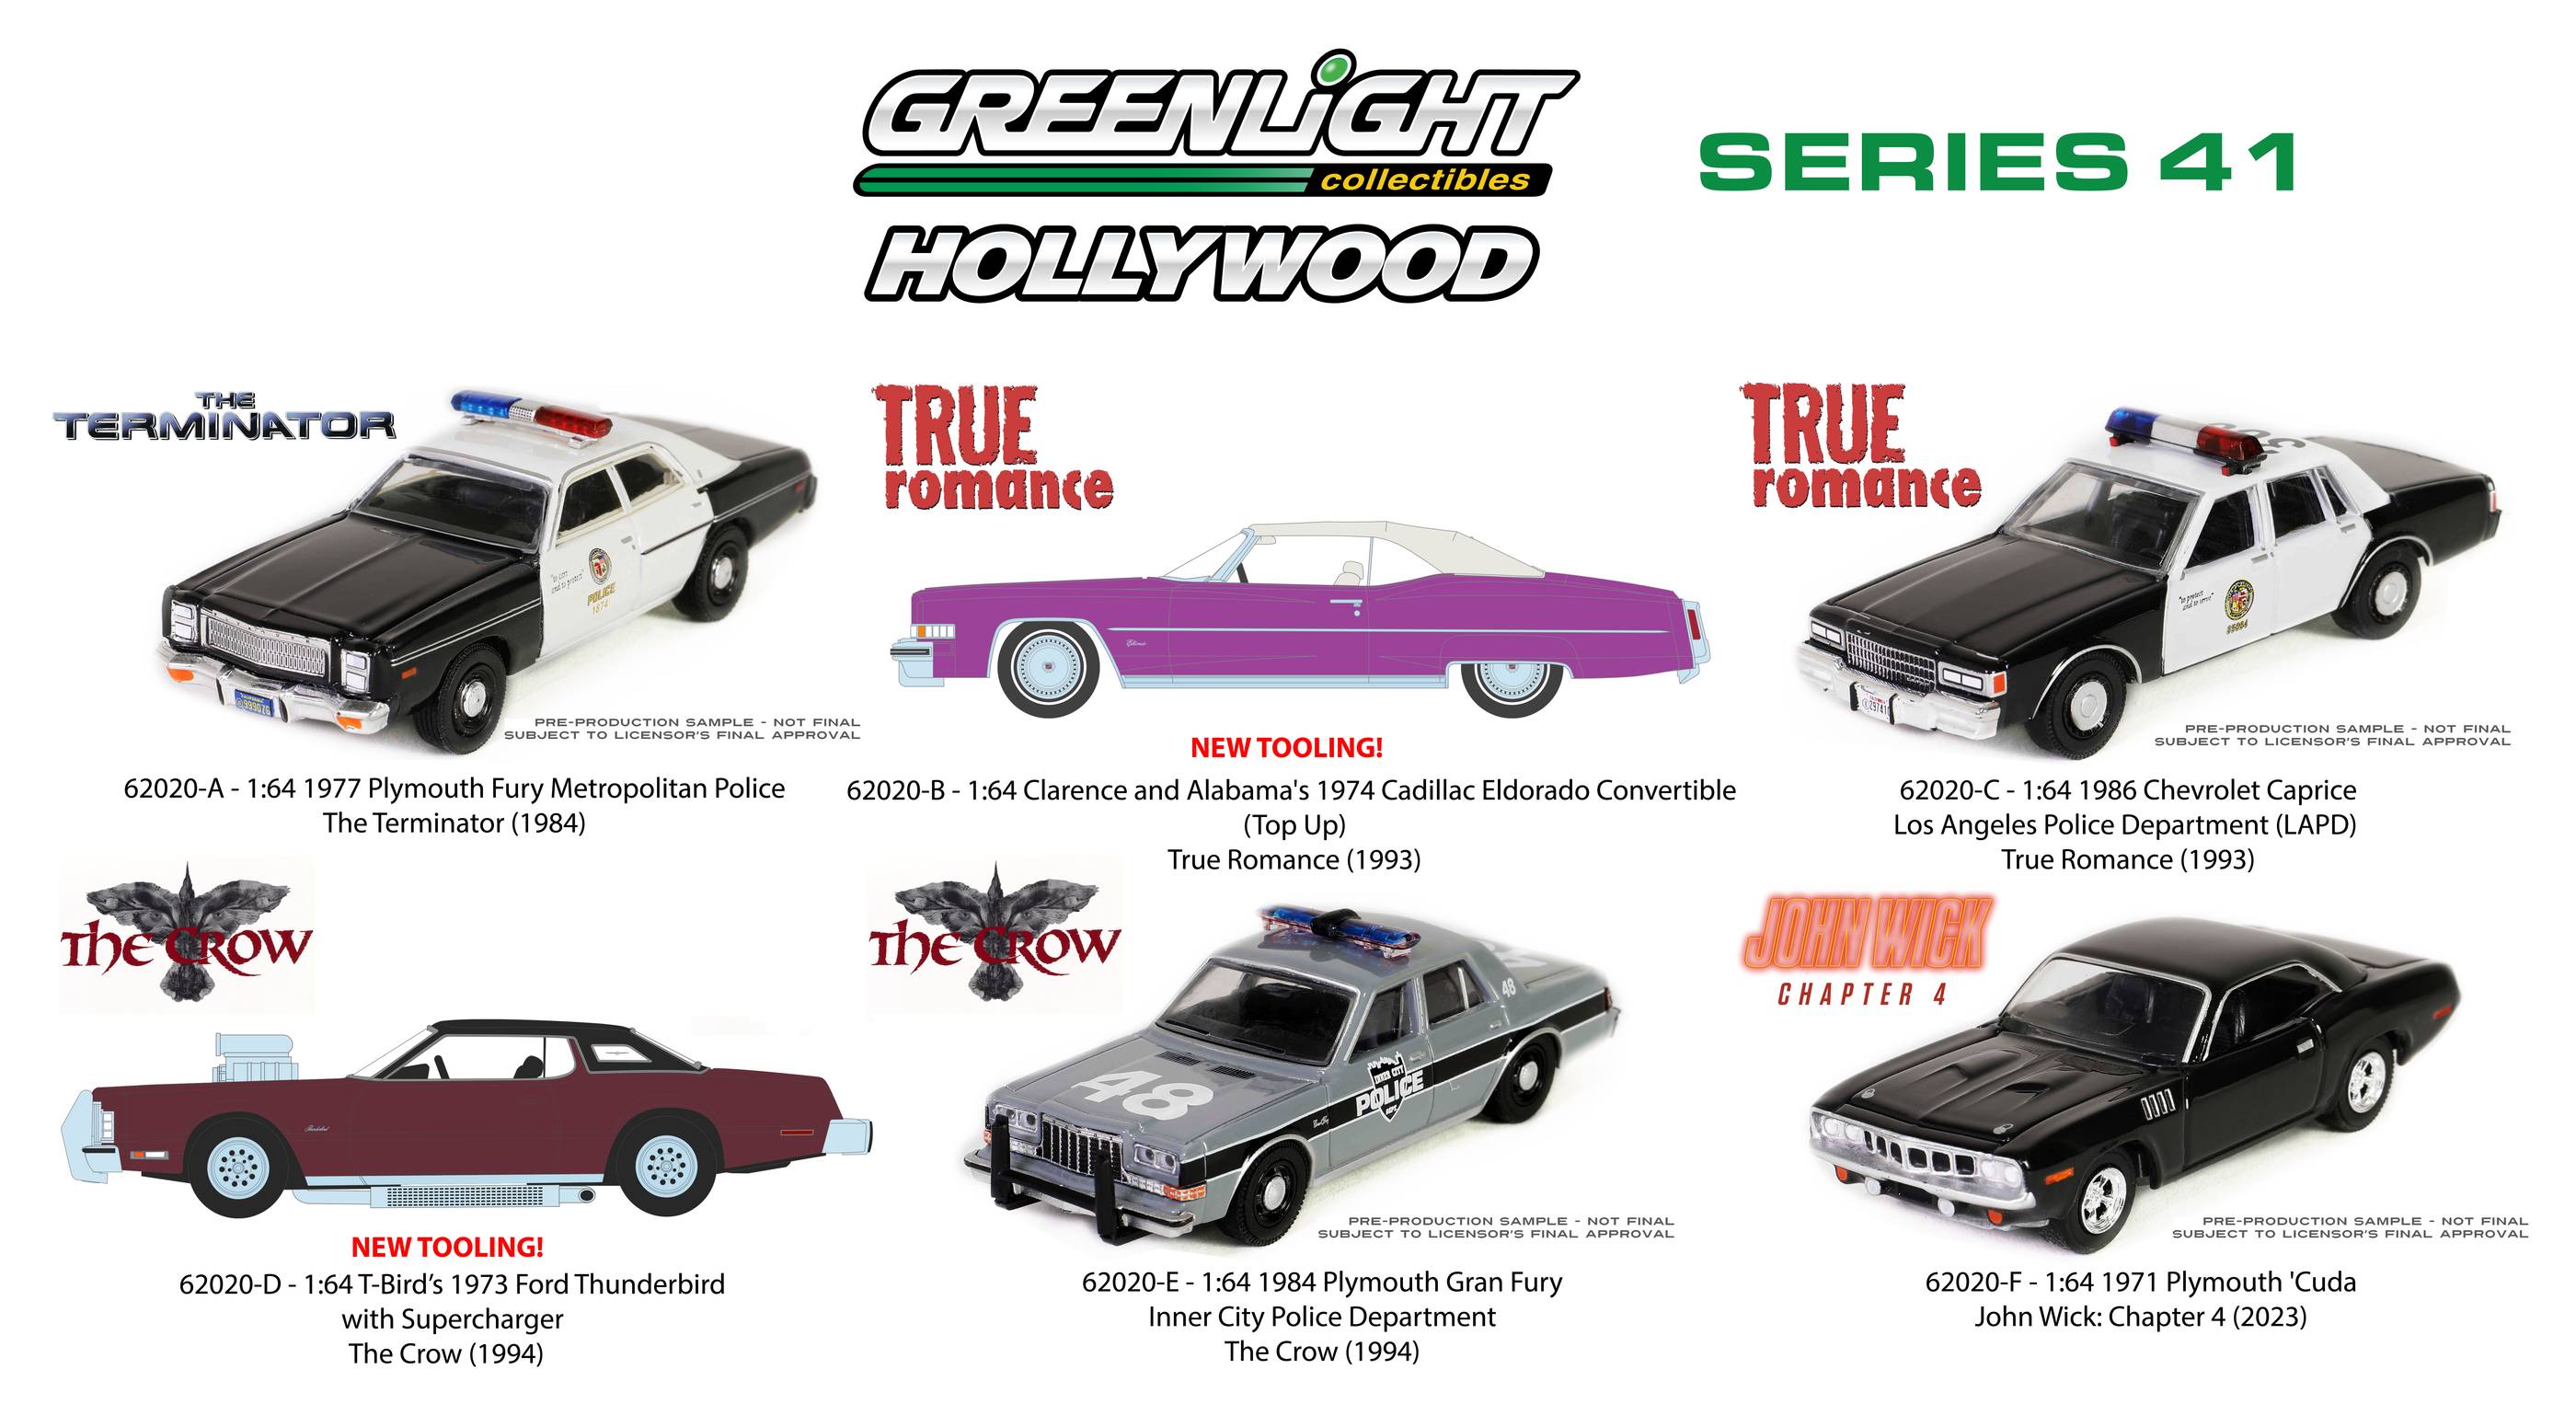 Greenlight - Hollywood Series 17 44770/48 1/64 scale Greenlight Hollywood  wholesale diecast model car